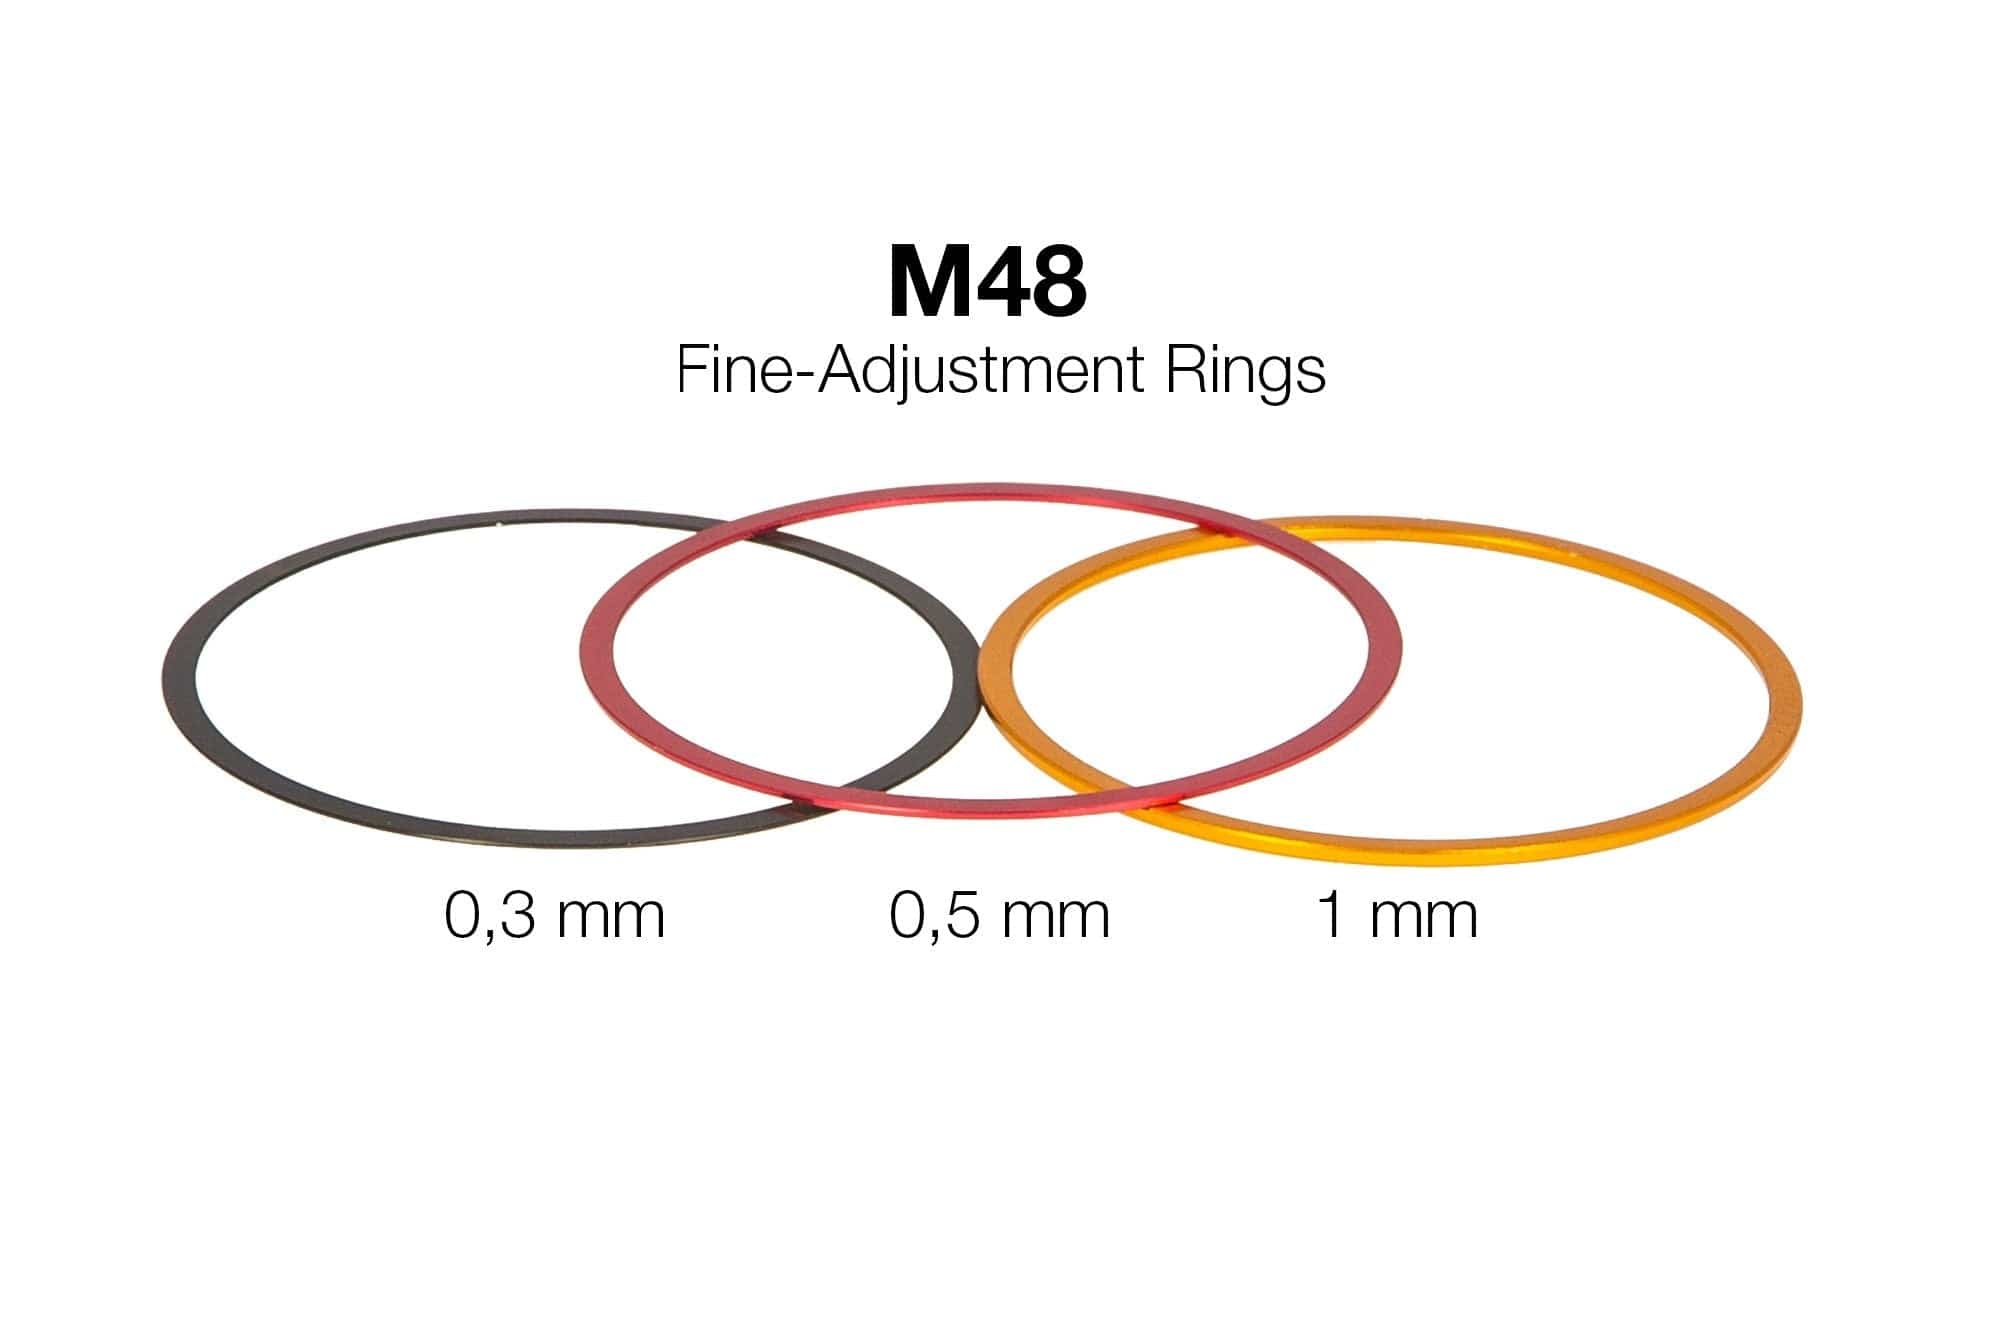 Baader Planetarium Accessory Baader M48 Fine-Adjustment-Ring-Set, consisting of 3 Precision M48 Alu-Adjustment-Rings 0,3/0,5/1mm - 2457915